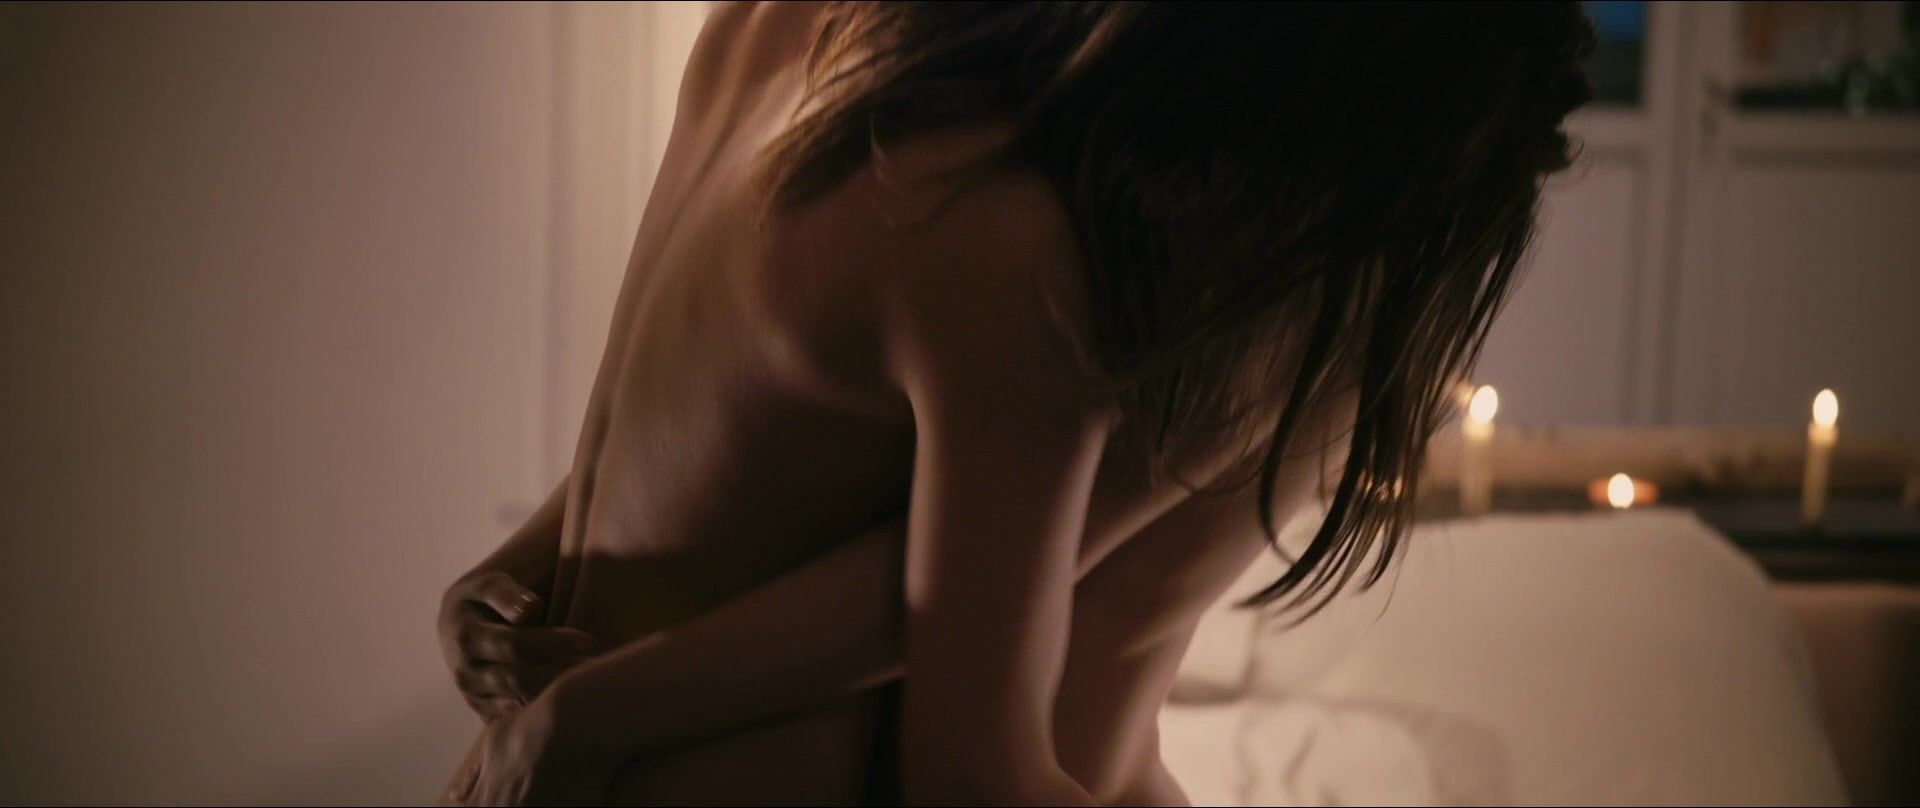 Fakku Best lesbian scene in movies | Adele Exarchopoulos nude & Léa Seydoux naked | The film "Blue Is The Warmest Color" (2013) Jeune Mec - 1